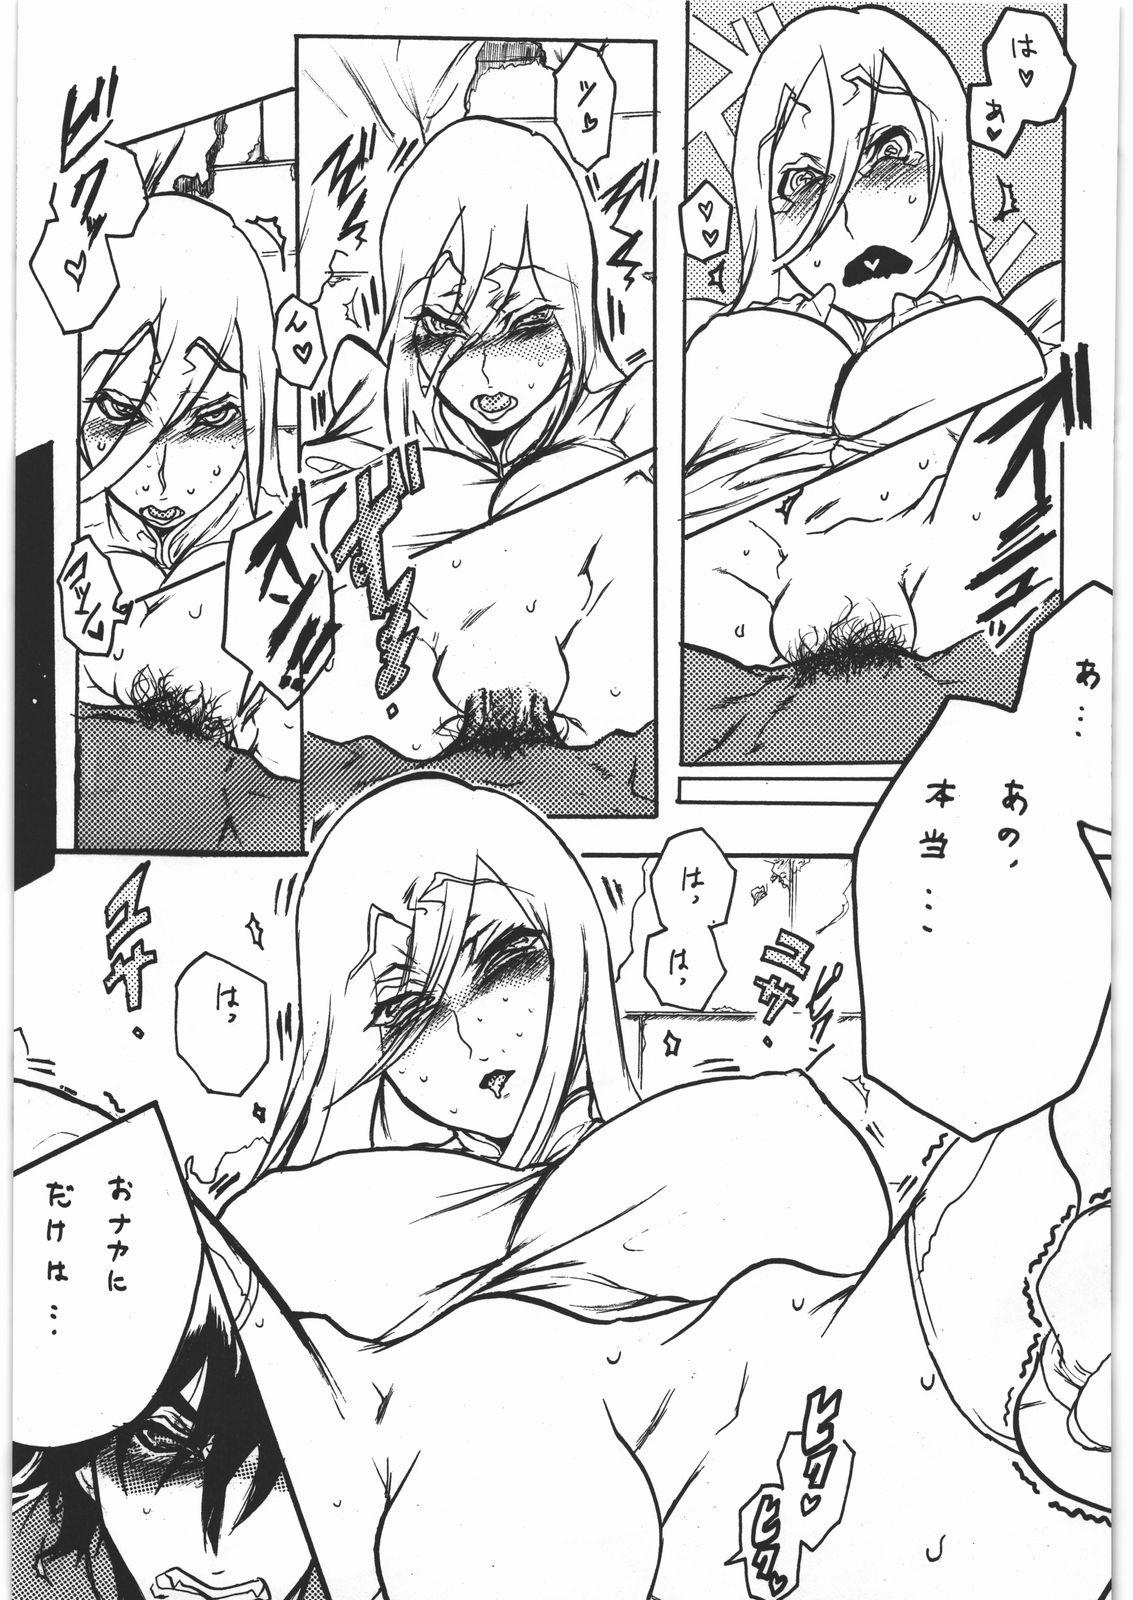 Cameltoe Mousou Decadence - Black lagoon Hellsing Drifters Show - Page 8